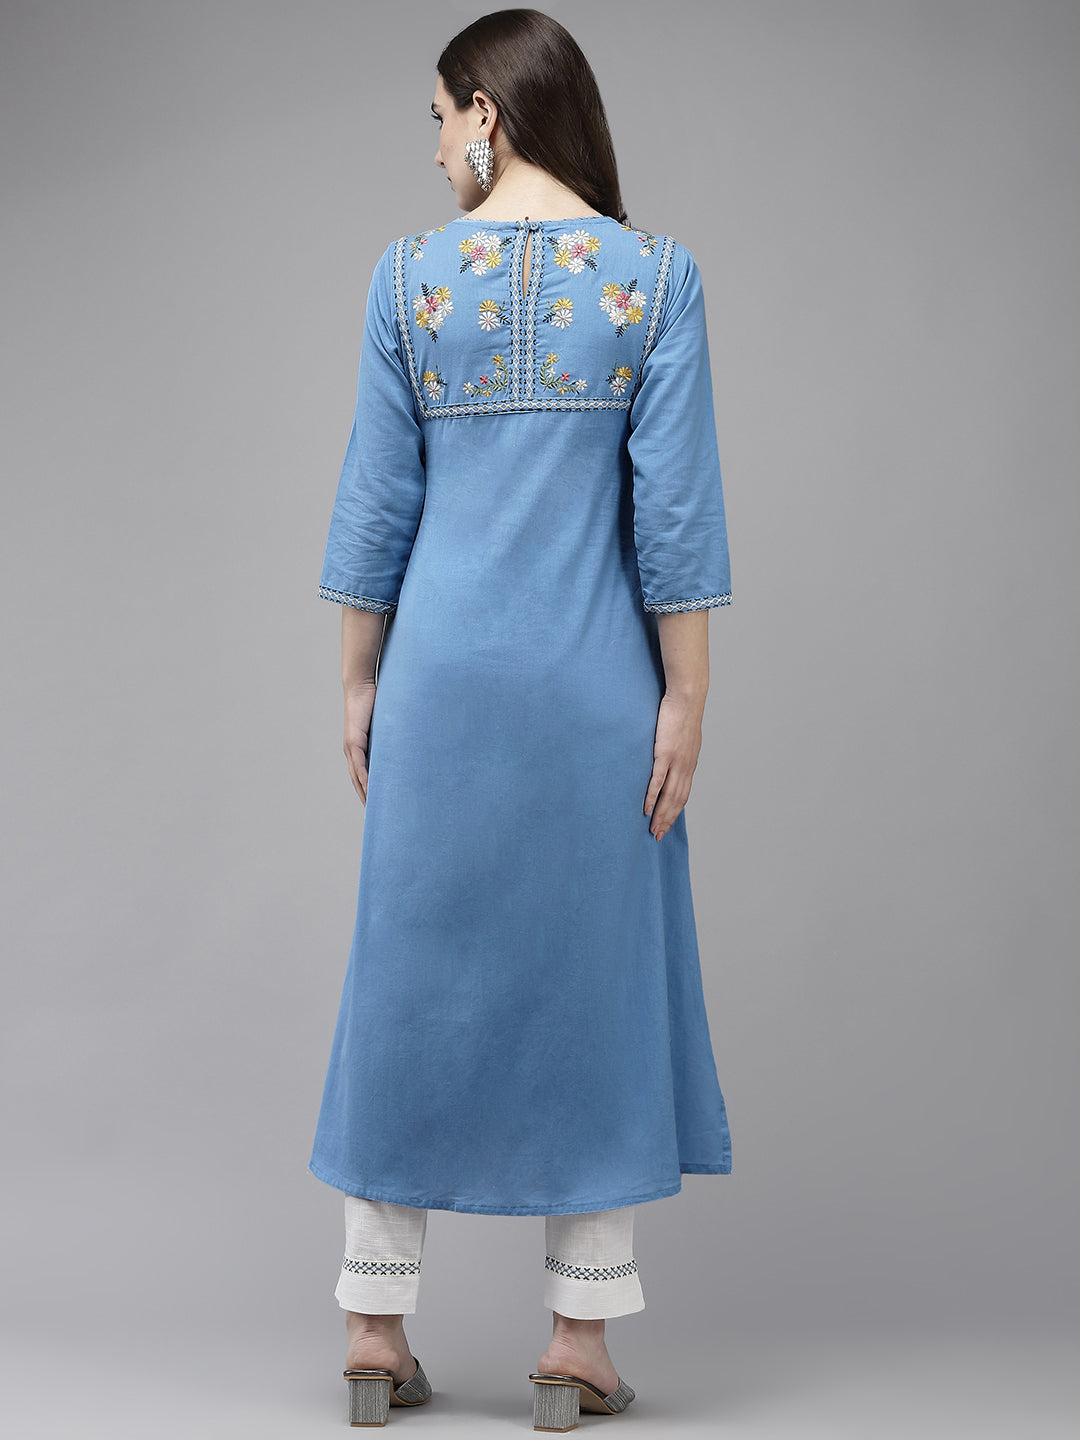 Ishin Women's Blue Back Embroidered A-Line Kurta with Trouser